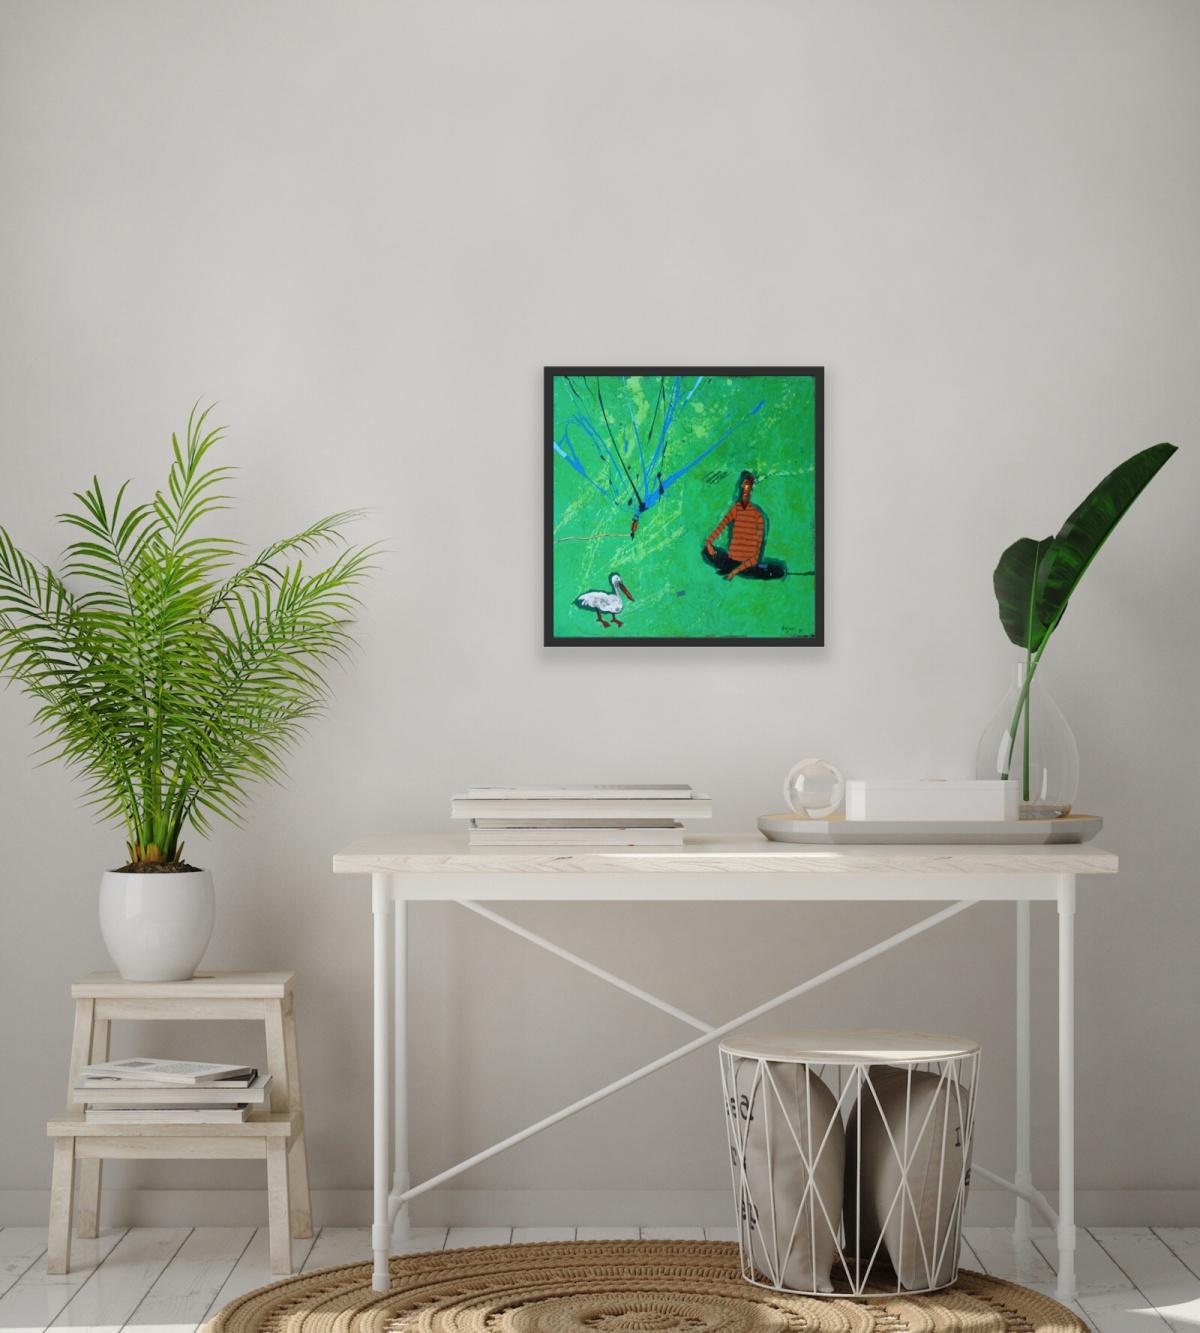 Encounter with a bird - Acrylic figurative painting, Landscape, Vibrant Green - Contemporary Painting by Rafał Bojdys